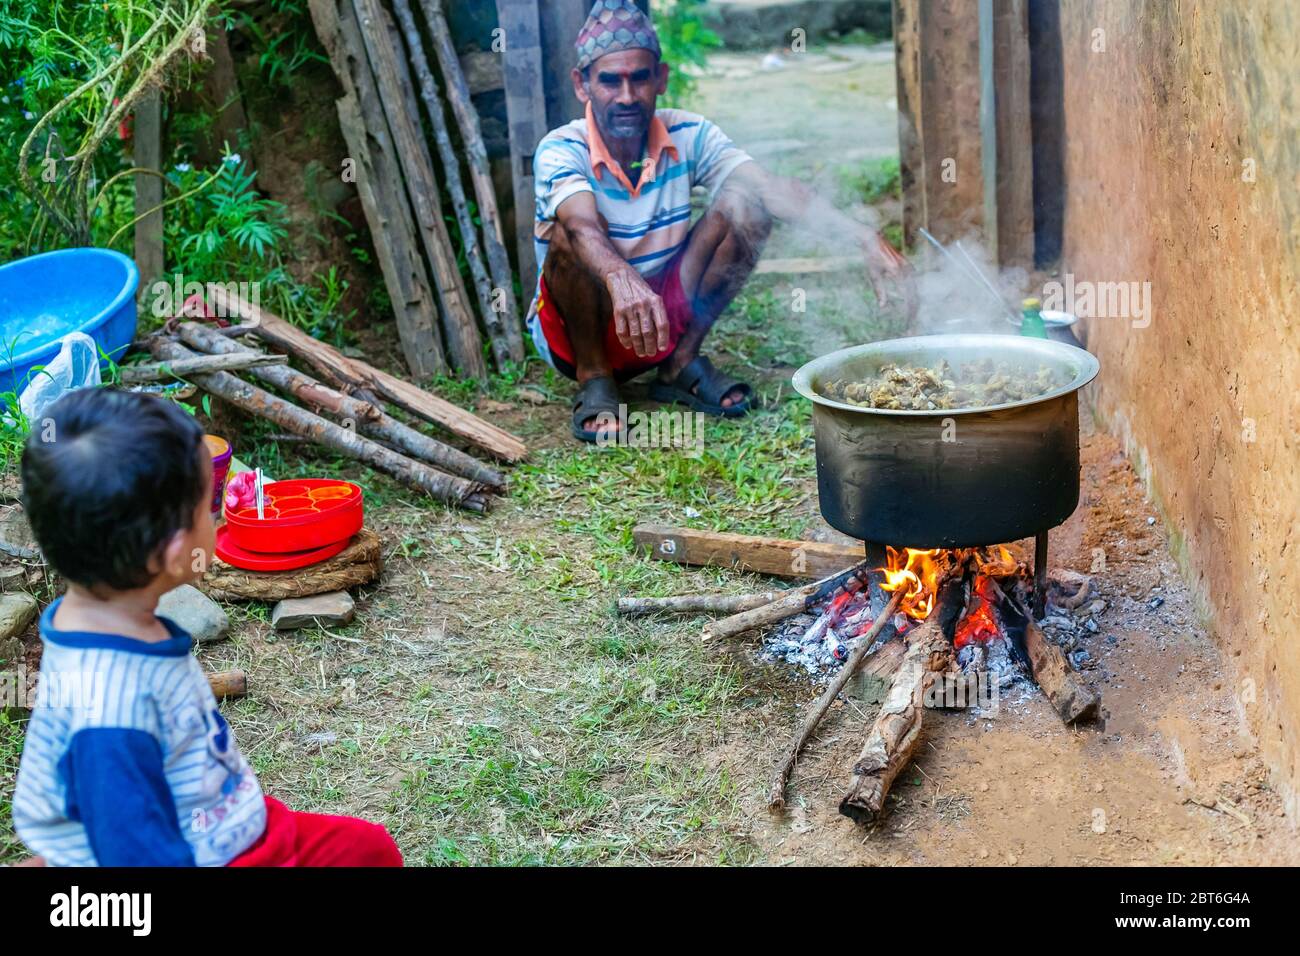 Gorkha,Nepal - October 6,2019: Old Man Cooking Mutton Curry in the rural village of Nepal. Mutton Curry.Selective Focus Stock Photo